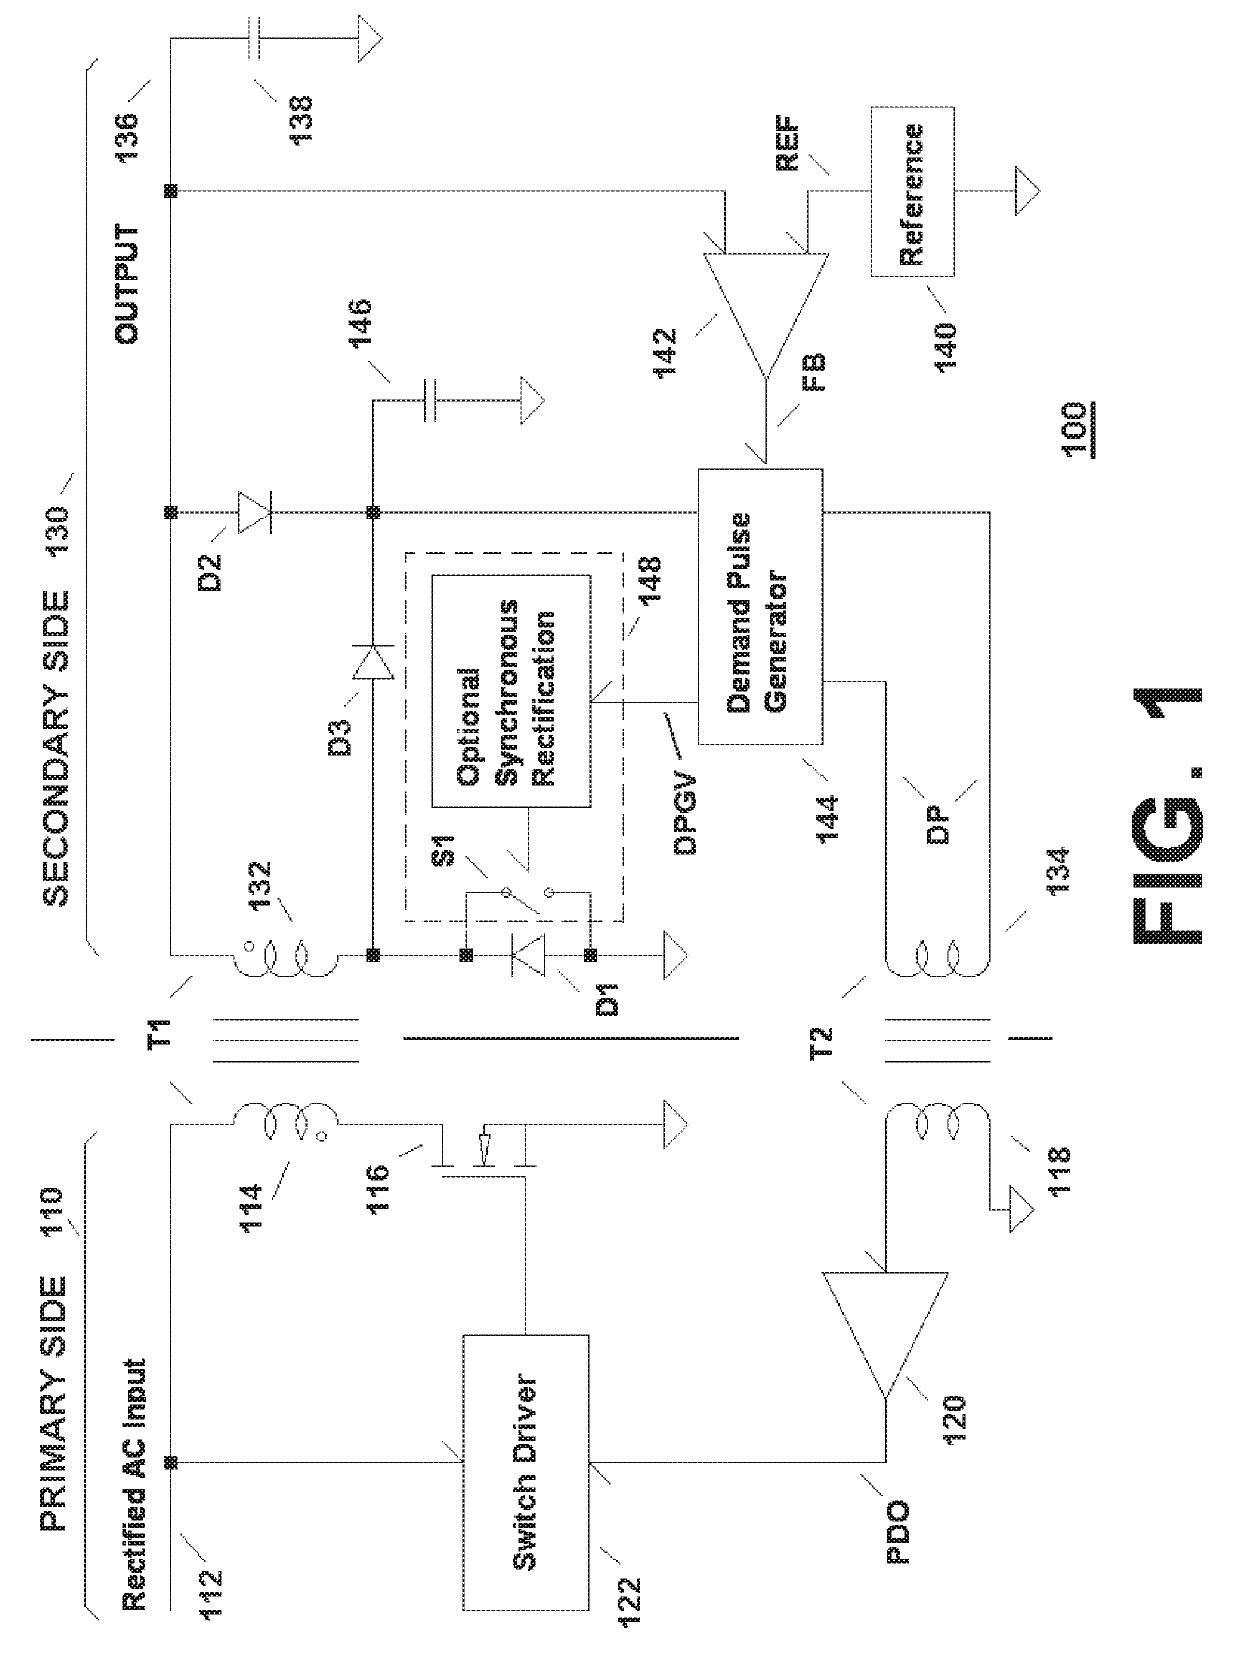 Trigger Circuitry for Fast, Low-Power State Transitions